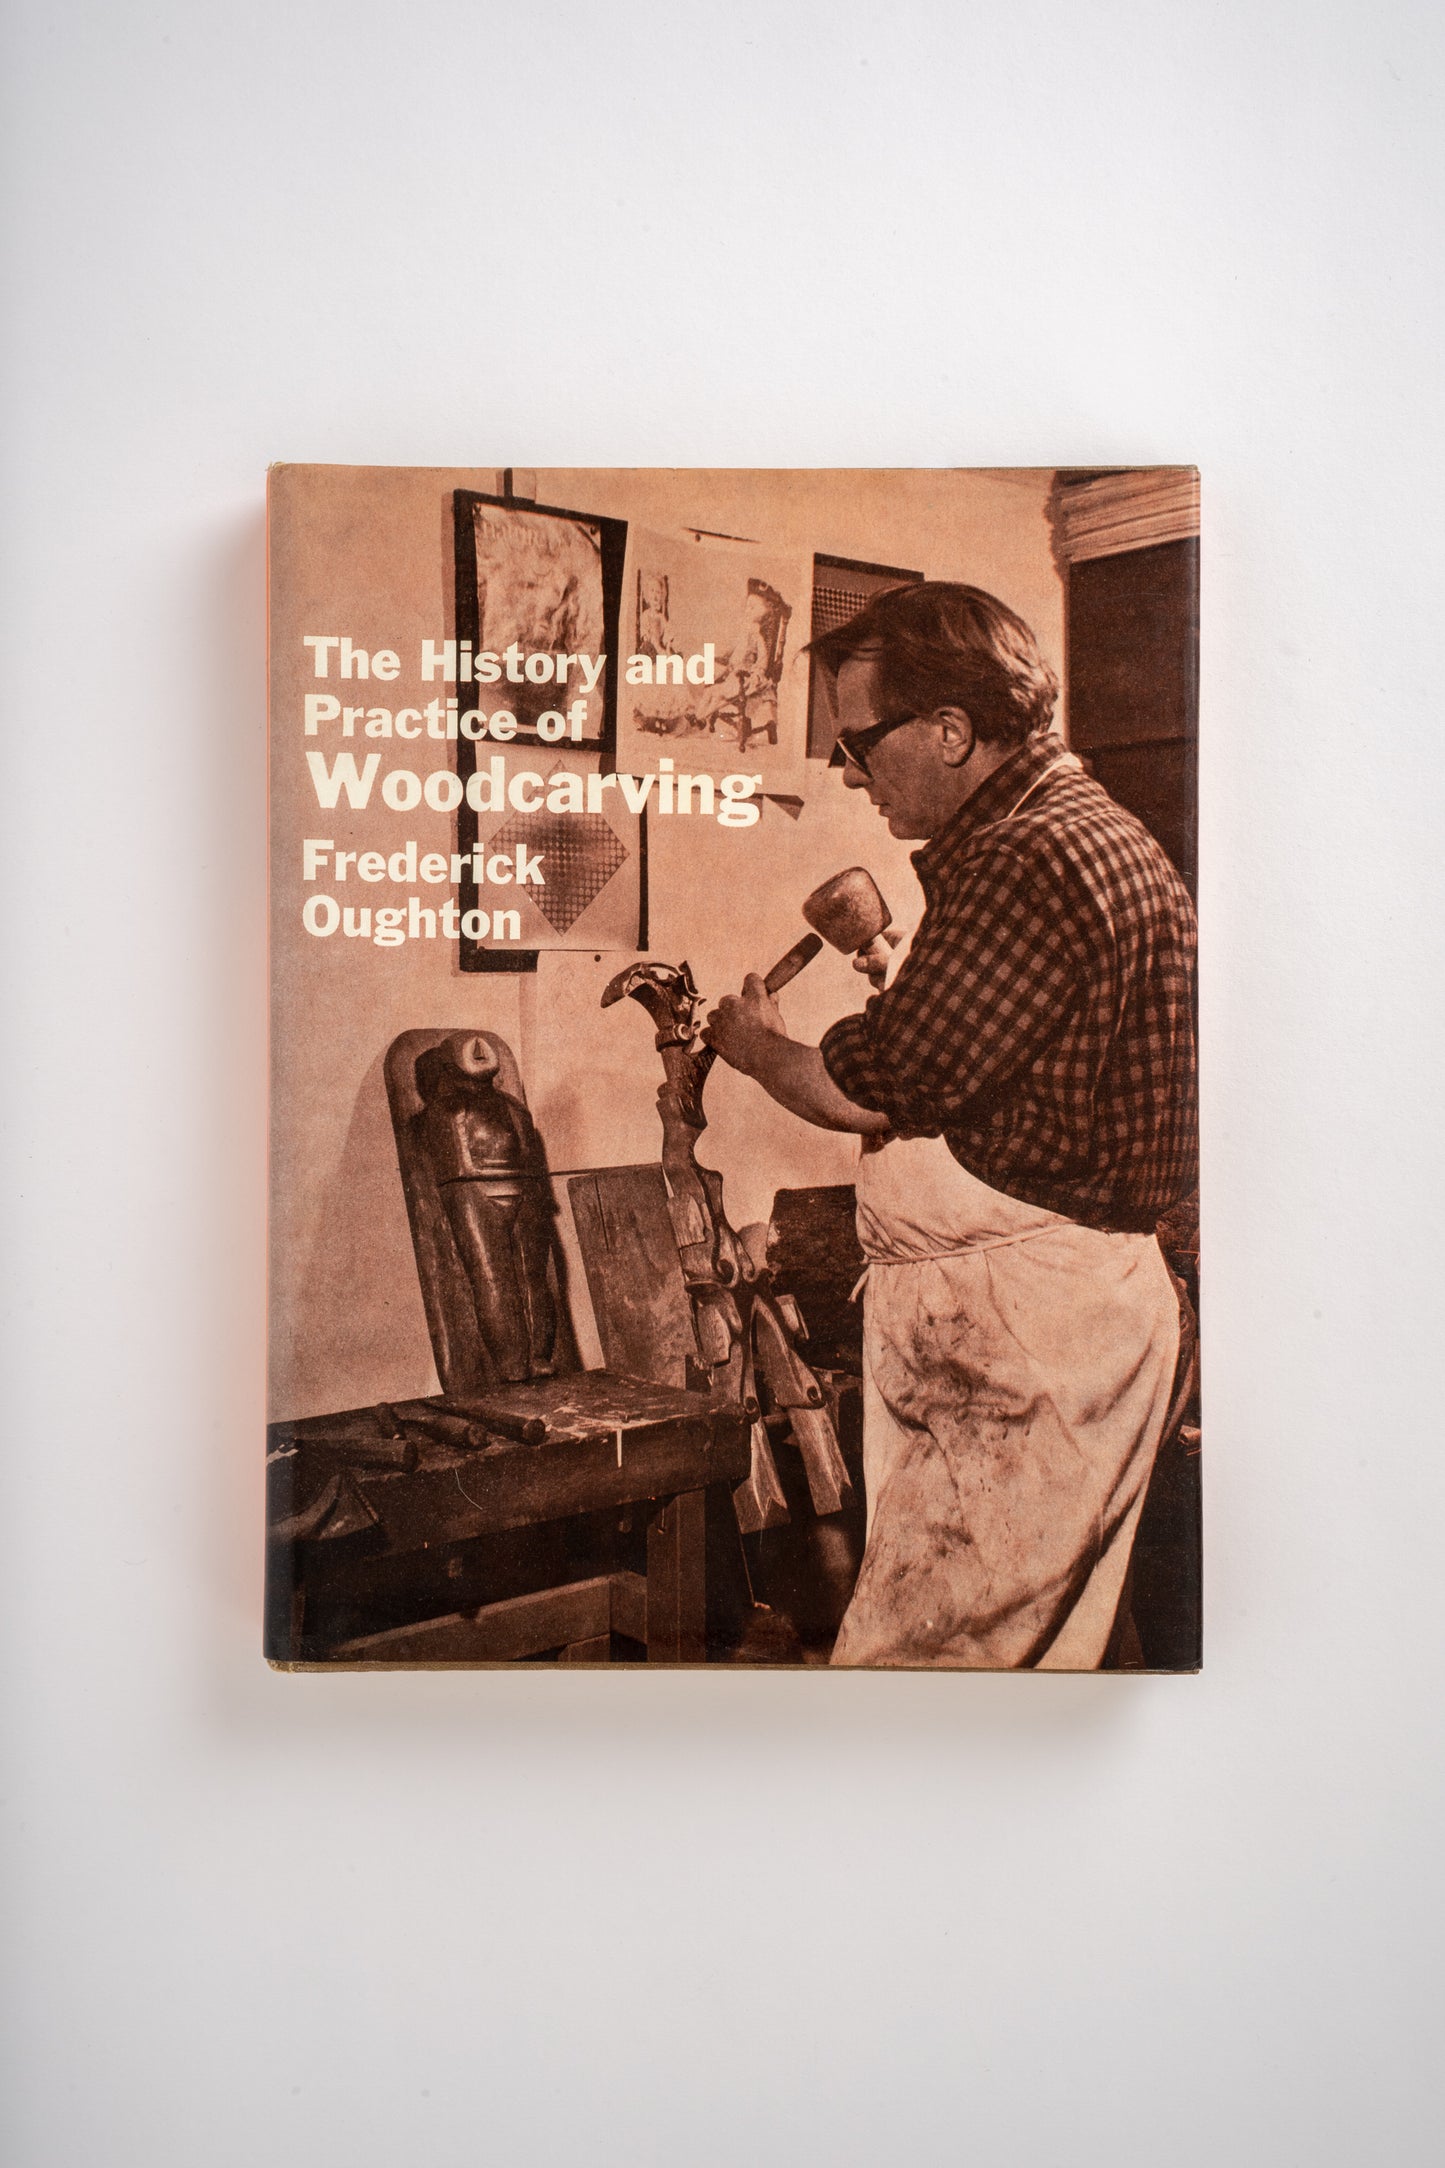 Oxfam Bookshop ' The History and Practice of Woodcarving'